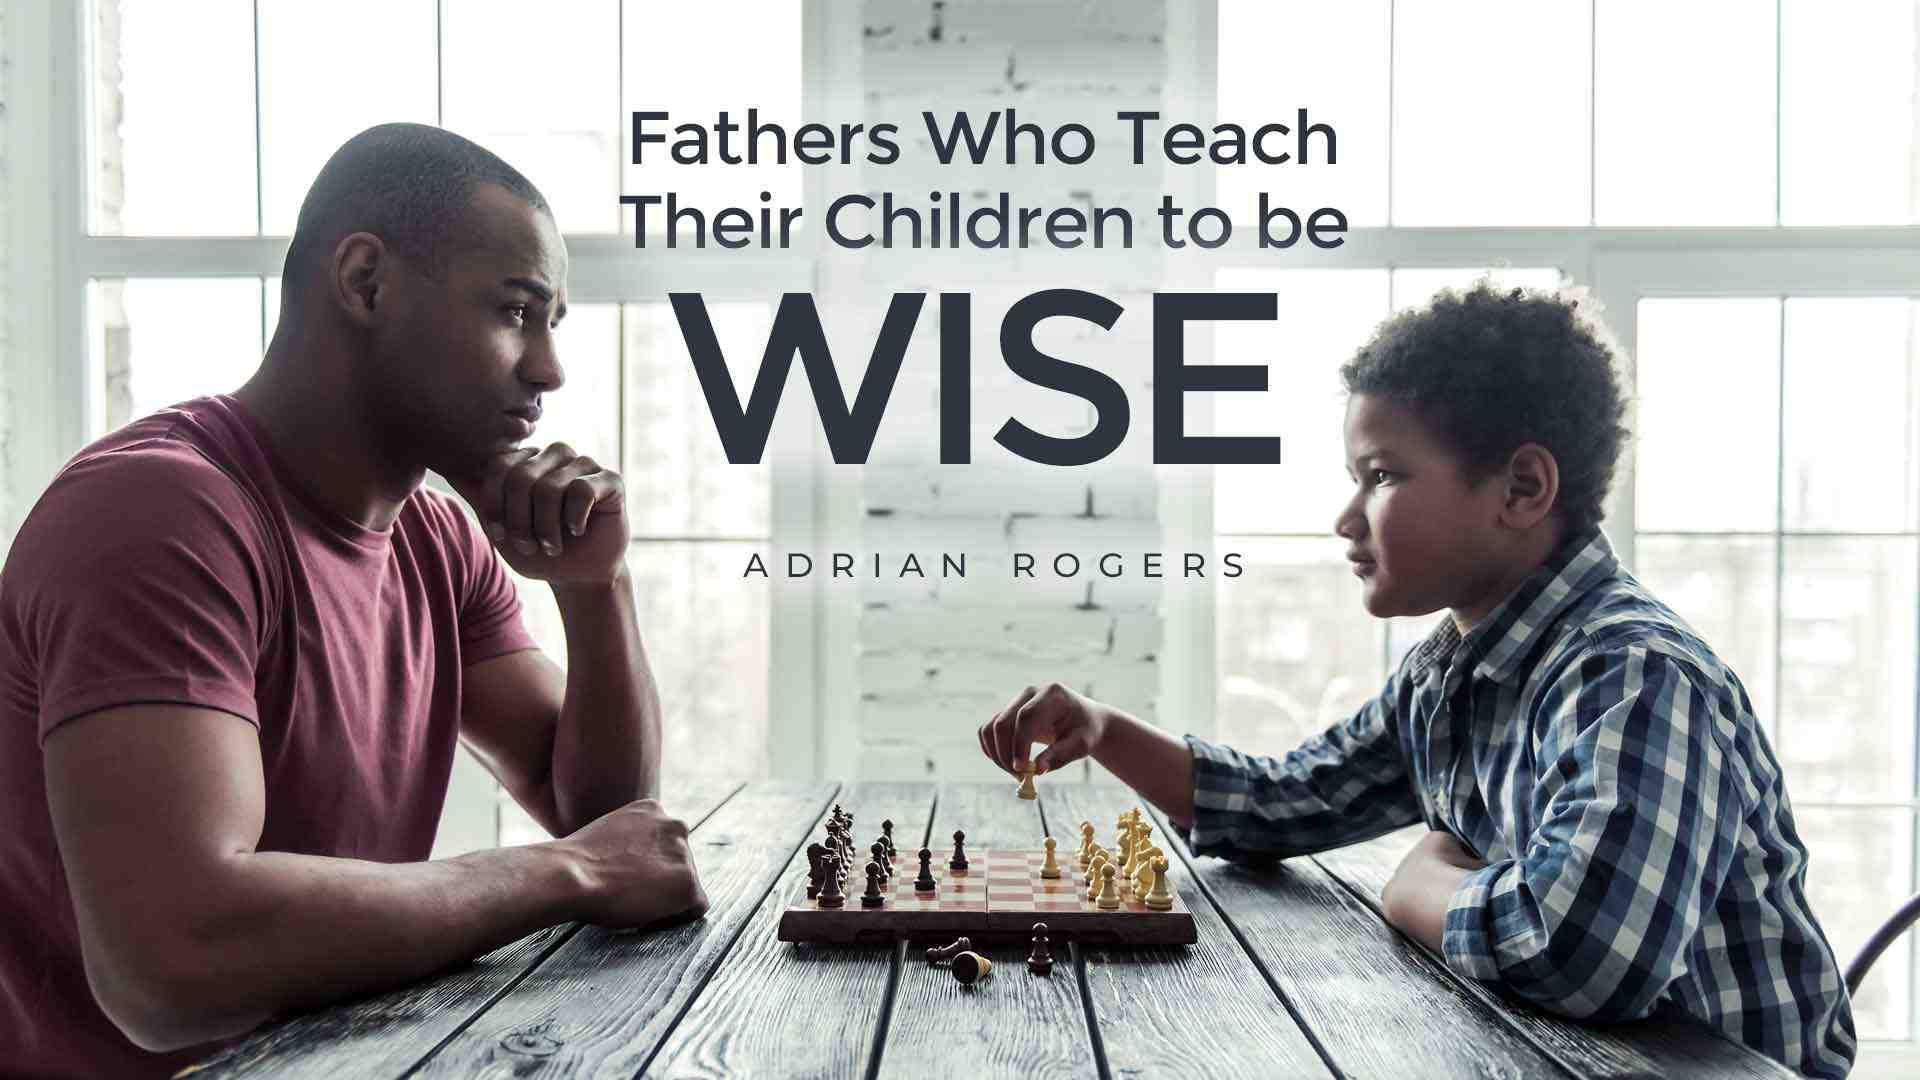 Fathers Who Teach Their Children to be Wise 1920x1080